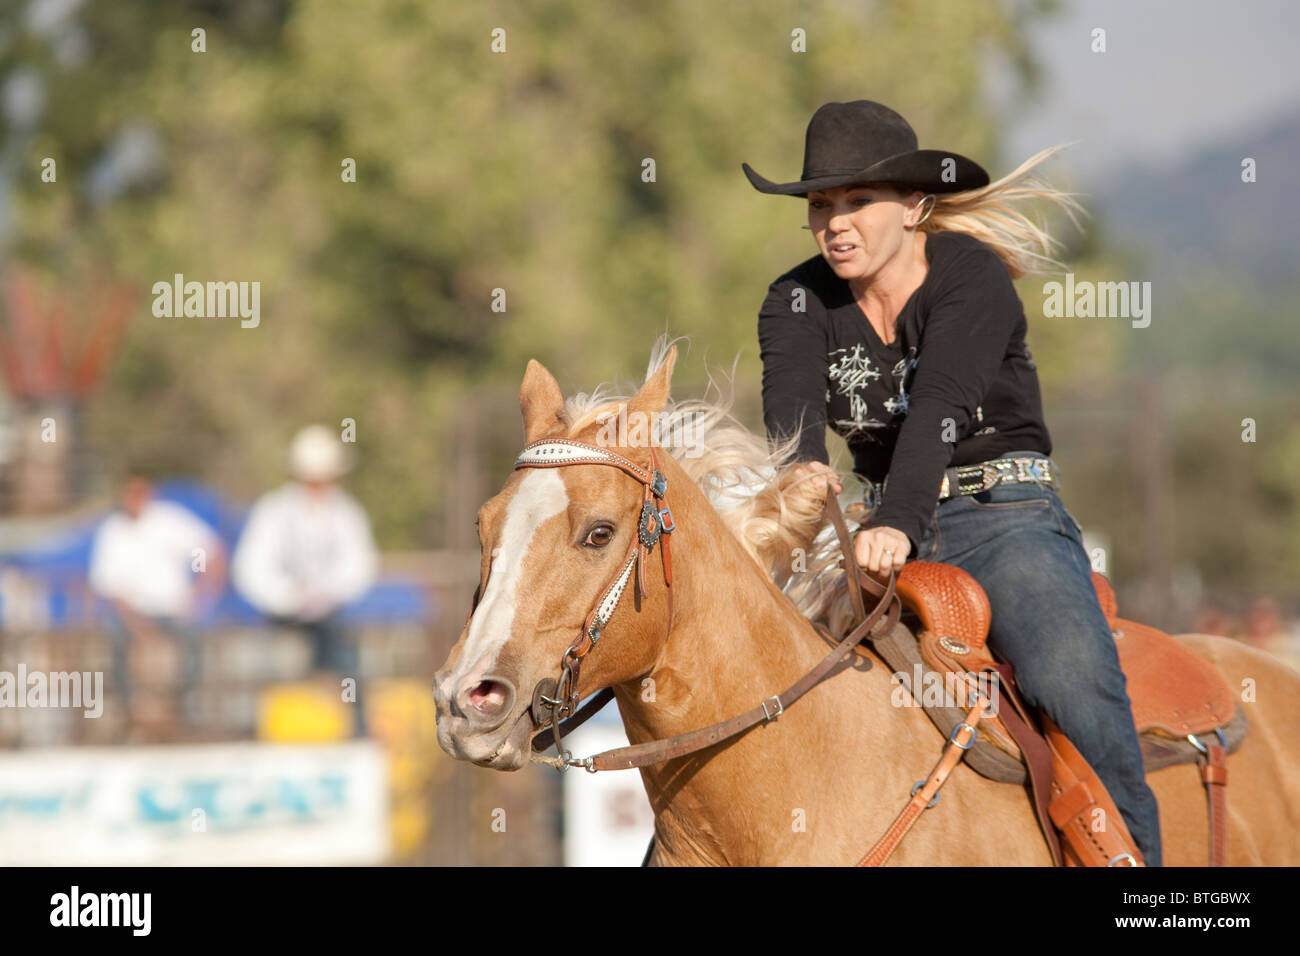 Cowgirl Chris Azevedo competes in the Barrel Race event at the San Dimas Rodeo in San Dimas on October 2, 2010. Stock Photo